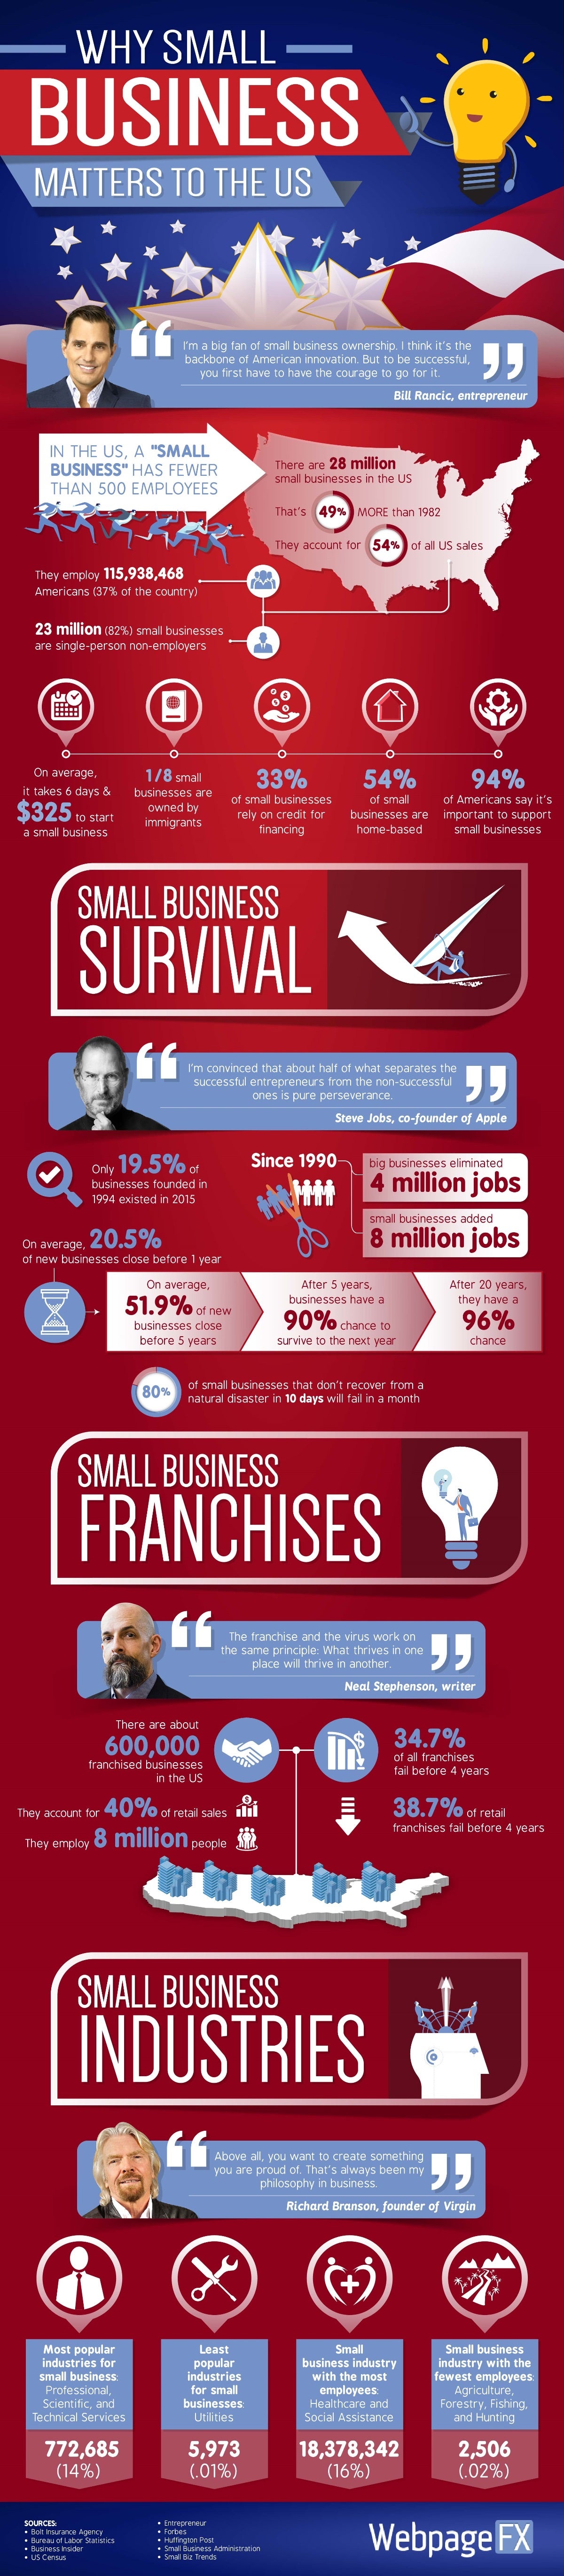 why-small-business-matters-infographic